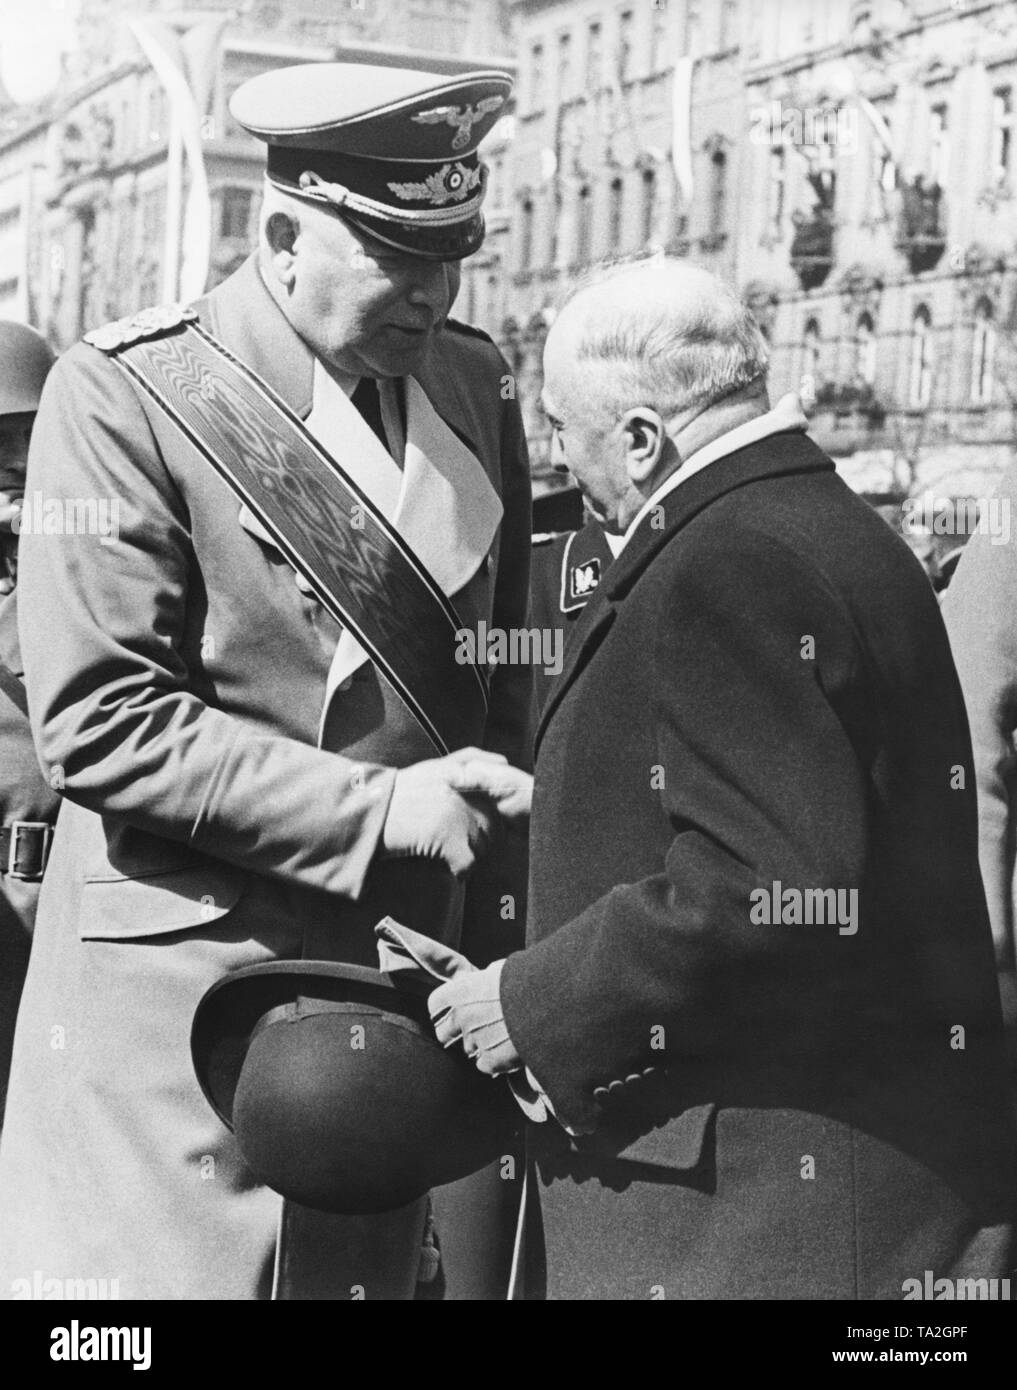 The Reich Protector of Bohemia and Moravia, Konstantin von Neurath, bids farewell to the Czech Head of State Emil Hacha. Previously, a parade took place at Wenceslas Square. In March 1939, the Czech territories were occupied by the Wehrmacht and the Protectorate of Bohemia and Moravia was established. Stock Photo